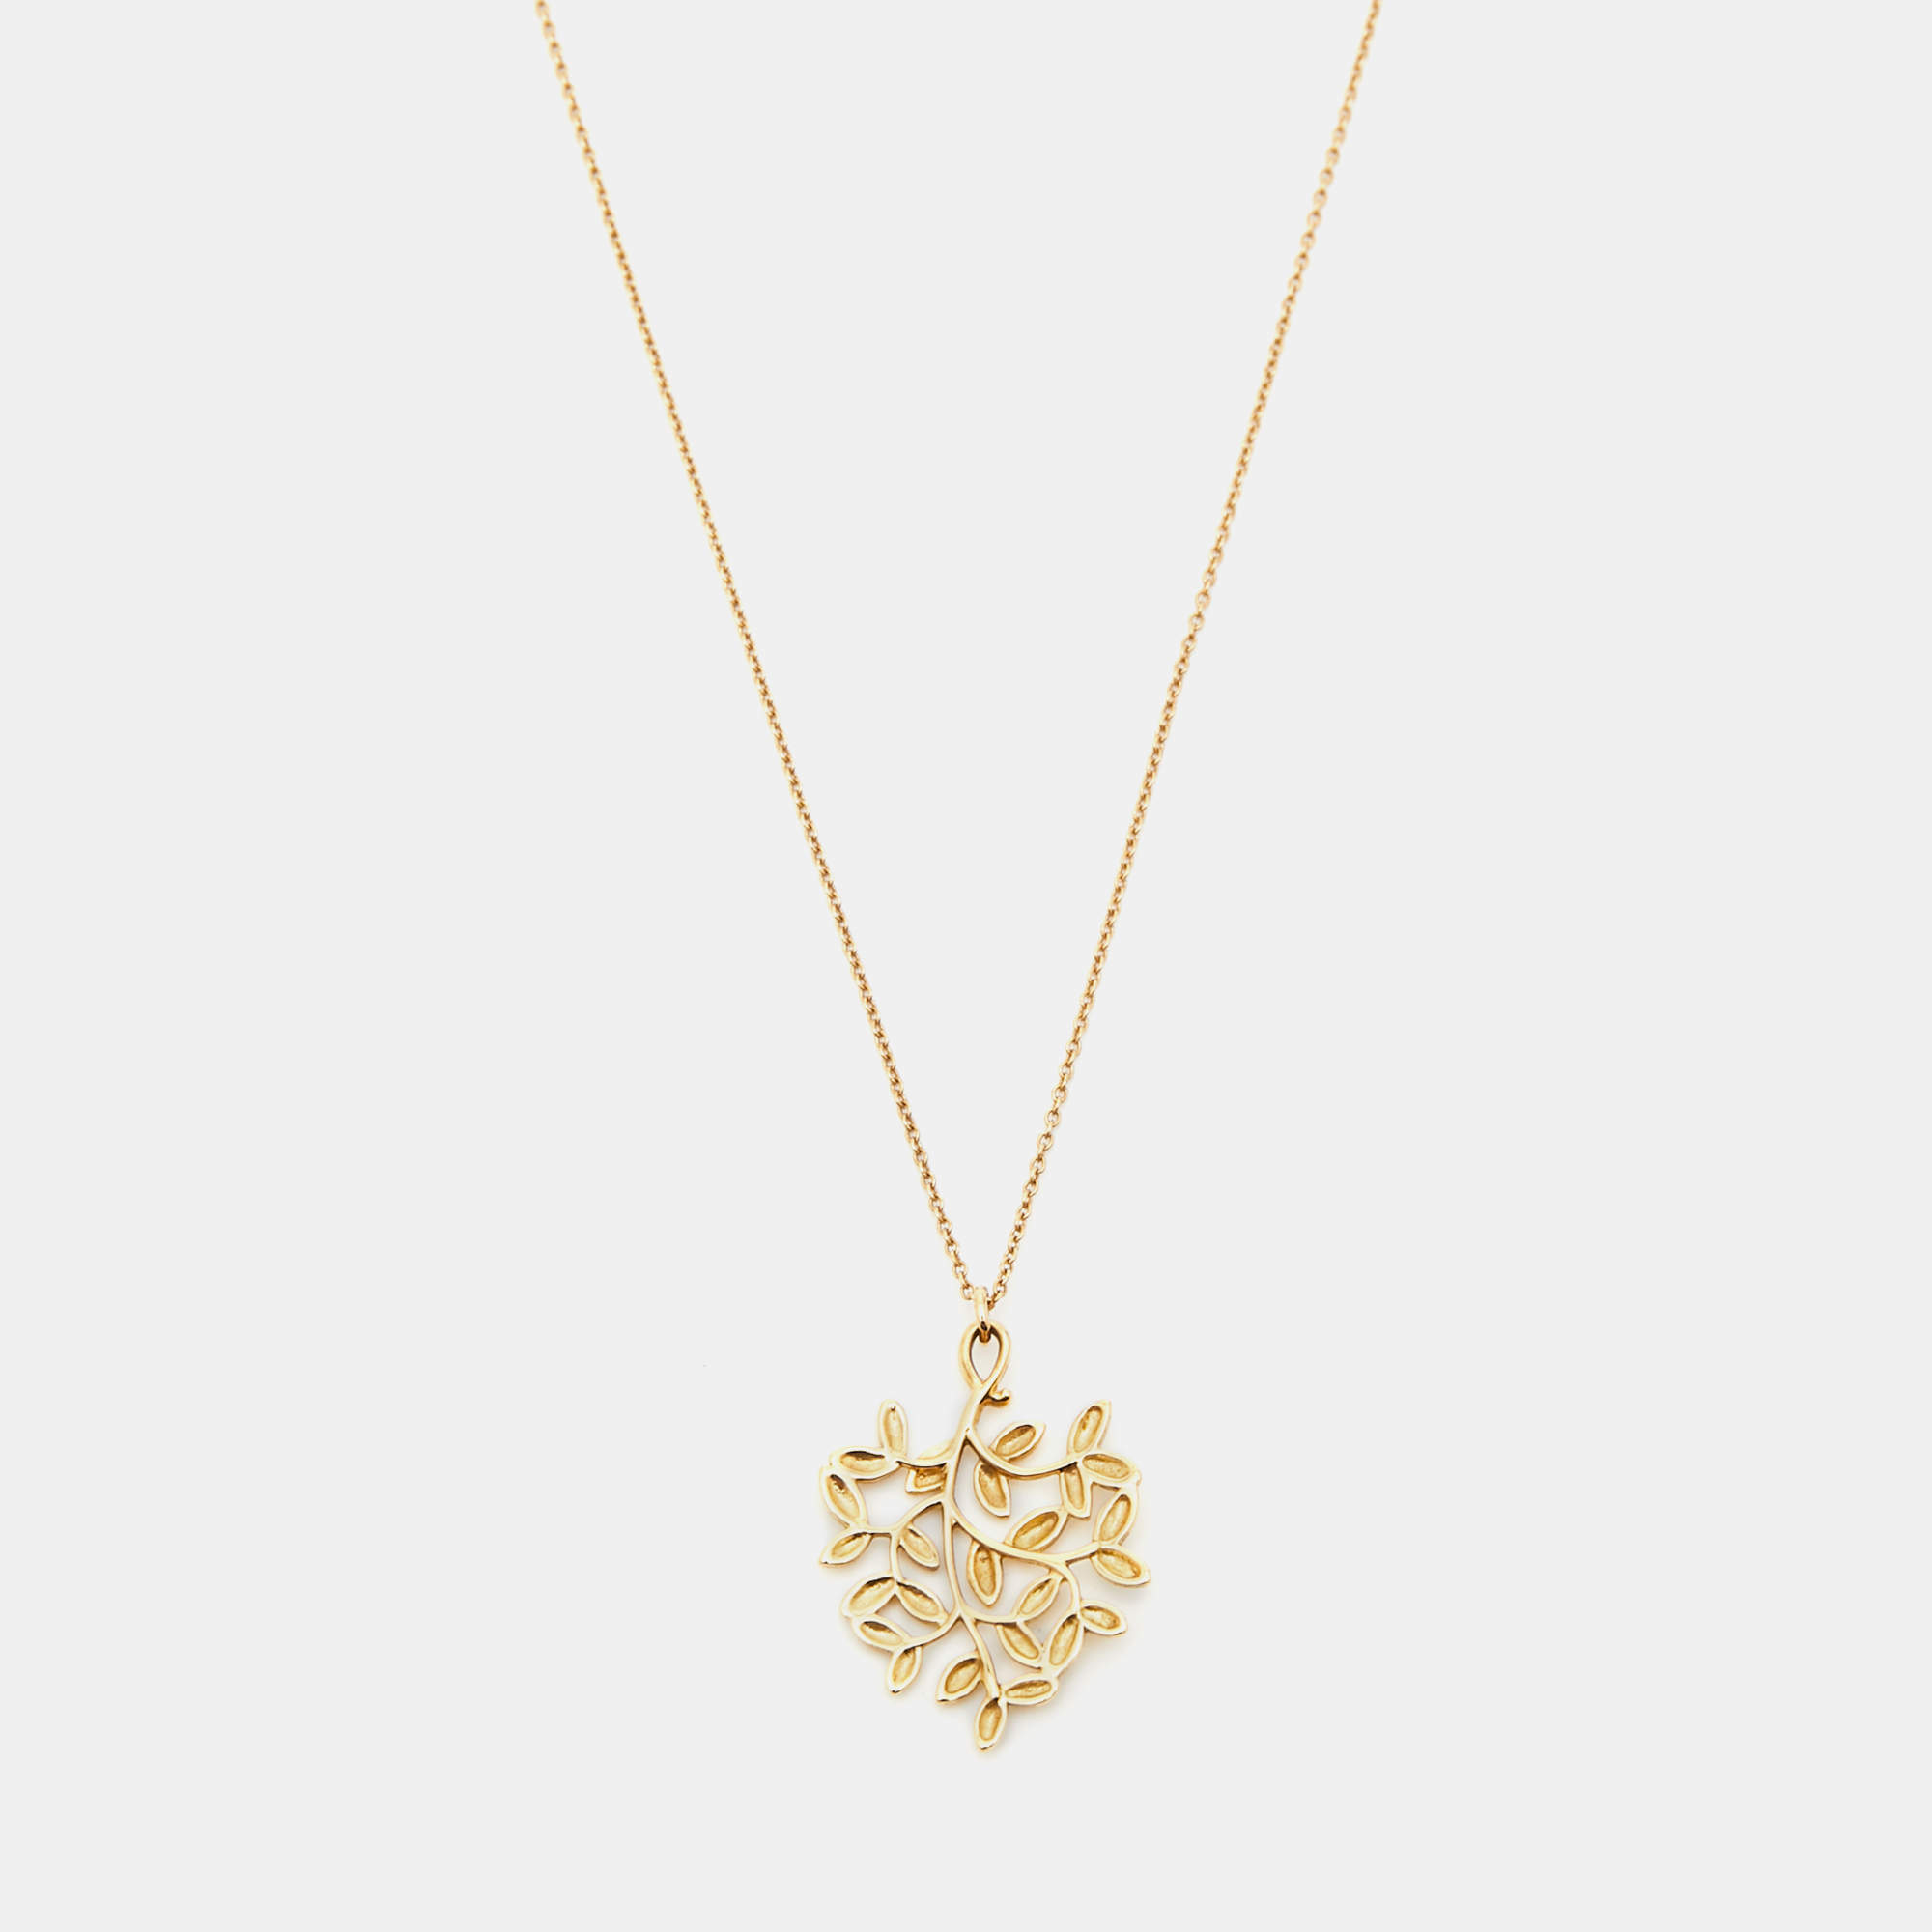 USED] Tiffany Paloma Picasso olive leaf vine 60021509 necklace |  jewelryのゆきざき - J355076